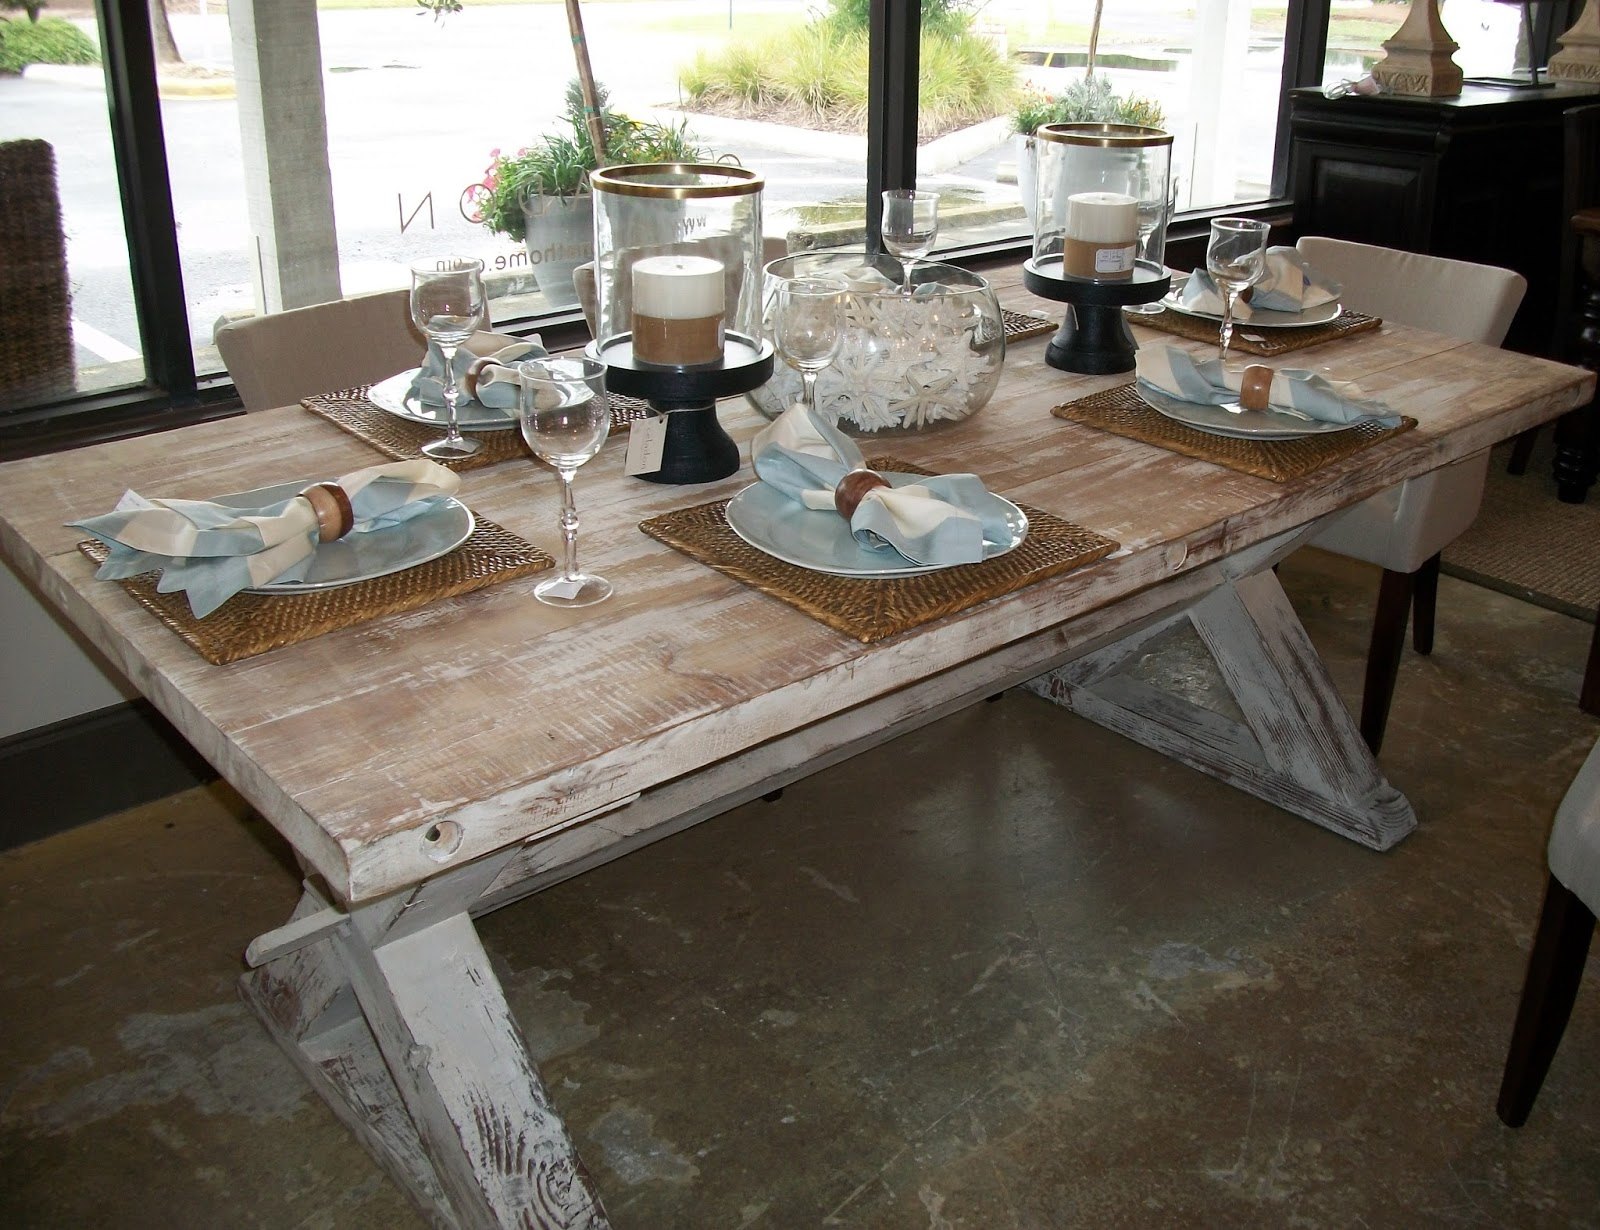 Phantastic Phinds Ideas For Annie Sloan Chalk Paint Dining Room via Kitchen Ideas